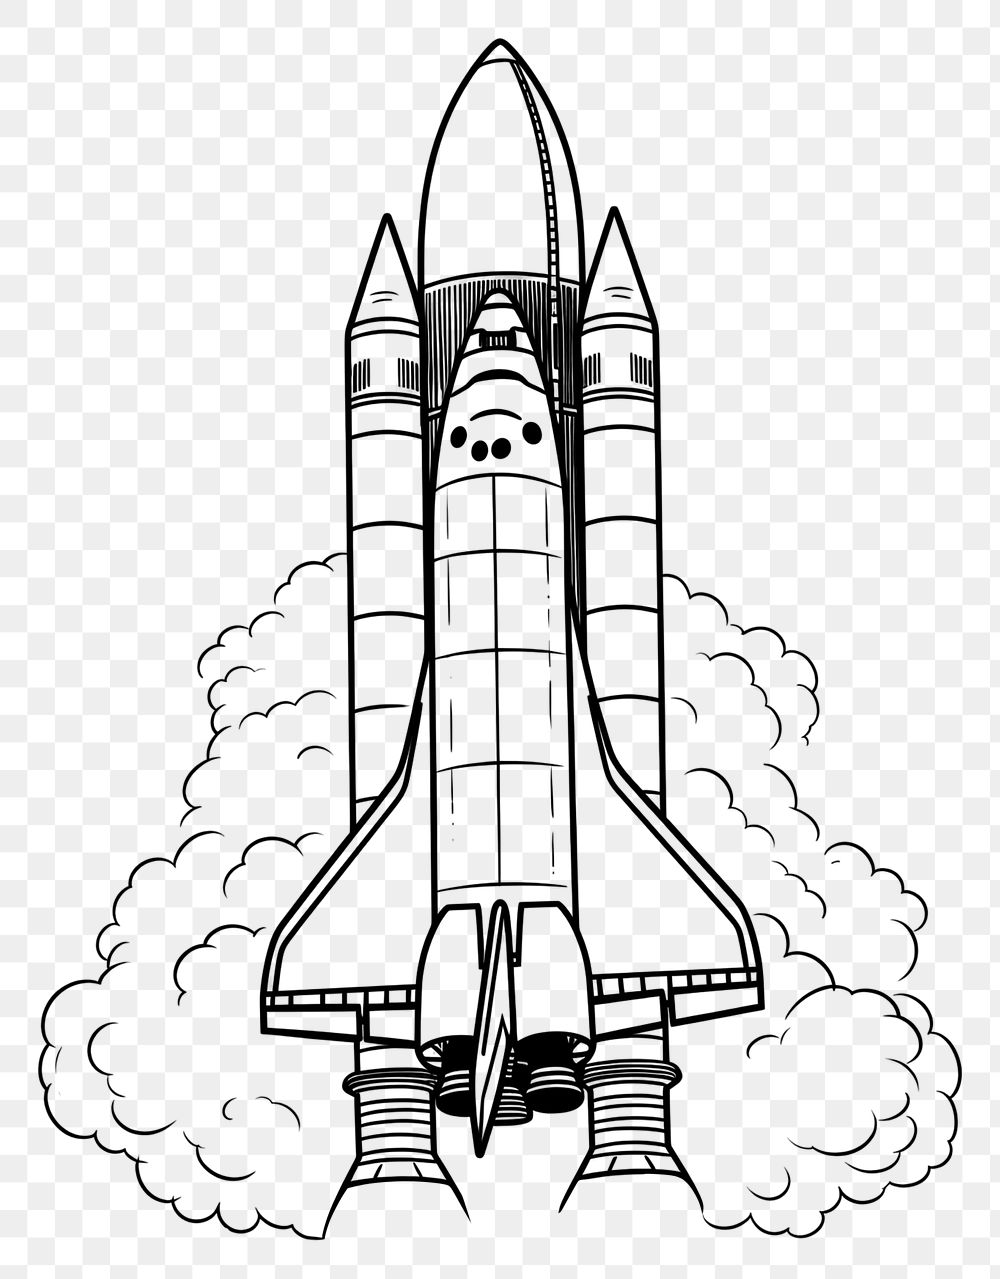 Drawing rocket launch spaceship technology Vector Image